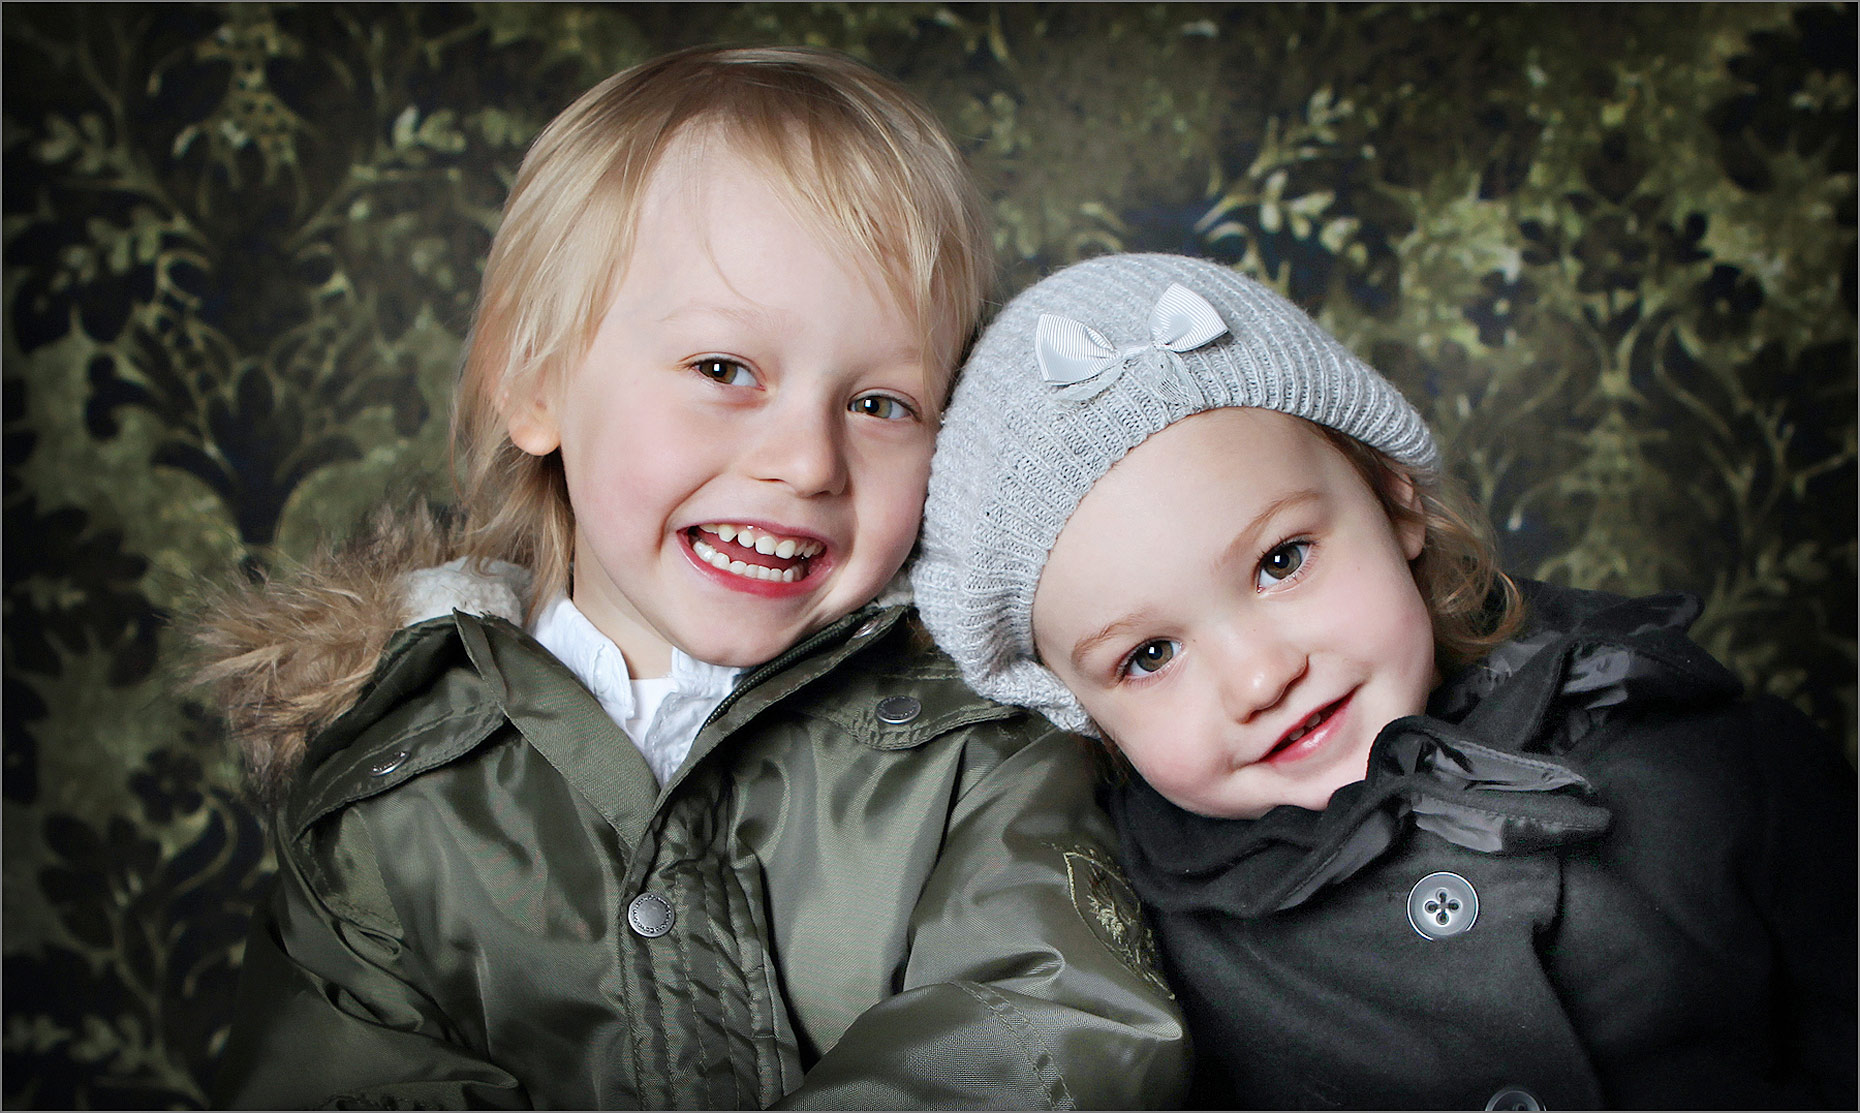 Child and family portraits, London, Ontario